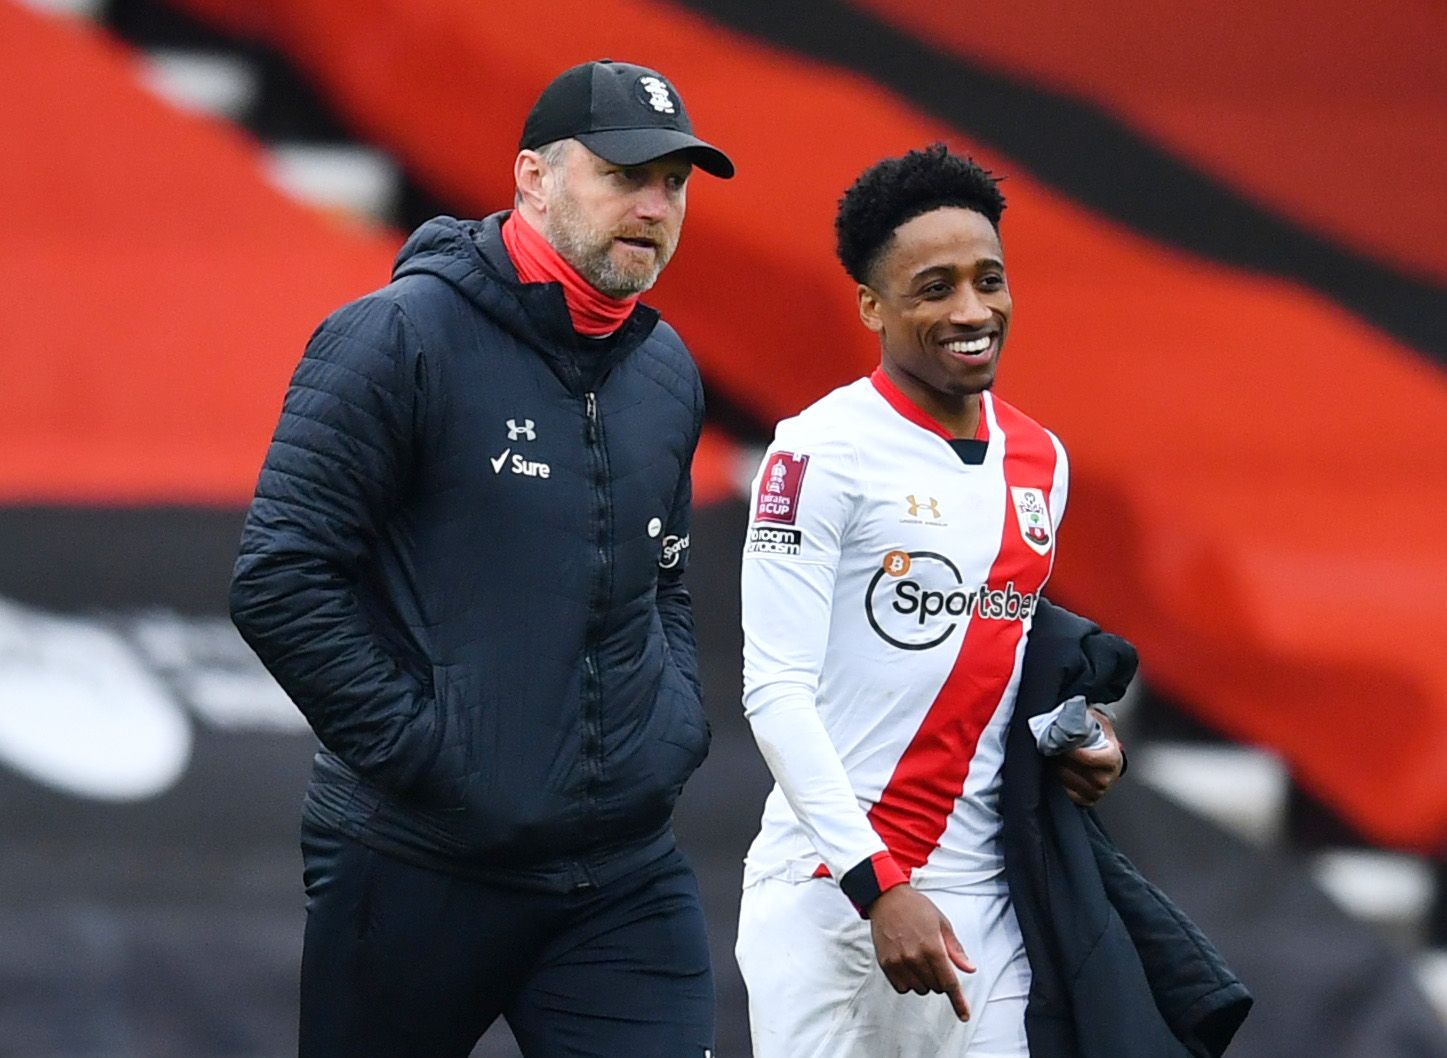 Soccer Football - FA Cup Quarter Final - AFC Bournemouth v Southampton - Vitality Stadium, Bournemouth, Britain - March 20, 2021 Southampton manager Ralph Hasenhuttl with Kyle Walker-Peters after the match REUTERS/Dylan Martinez